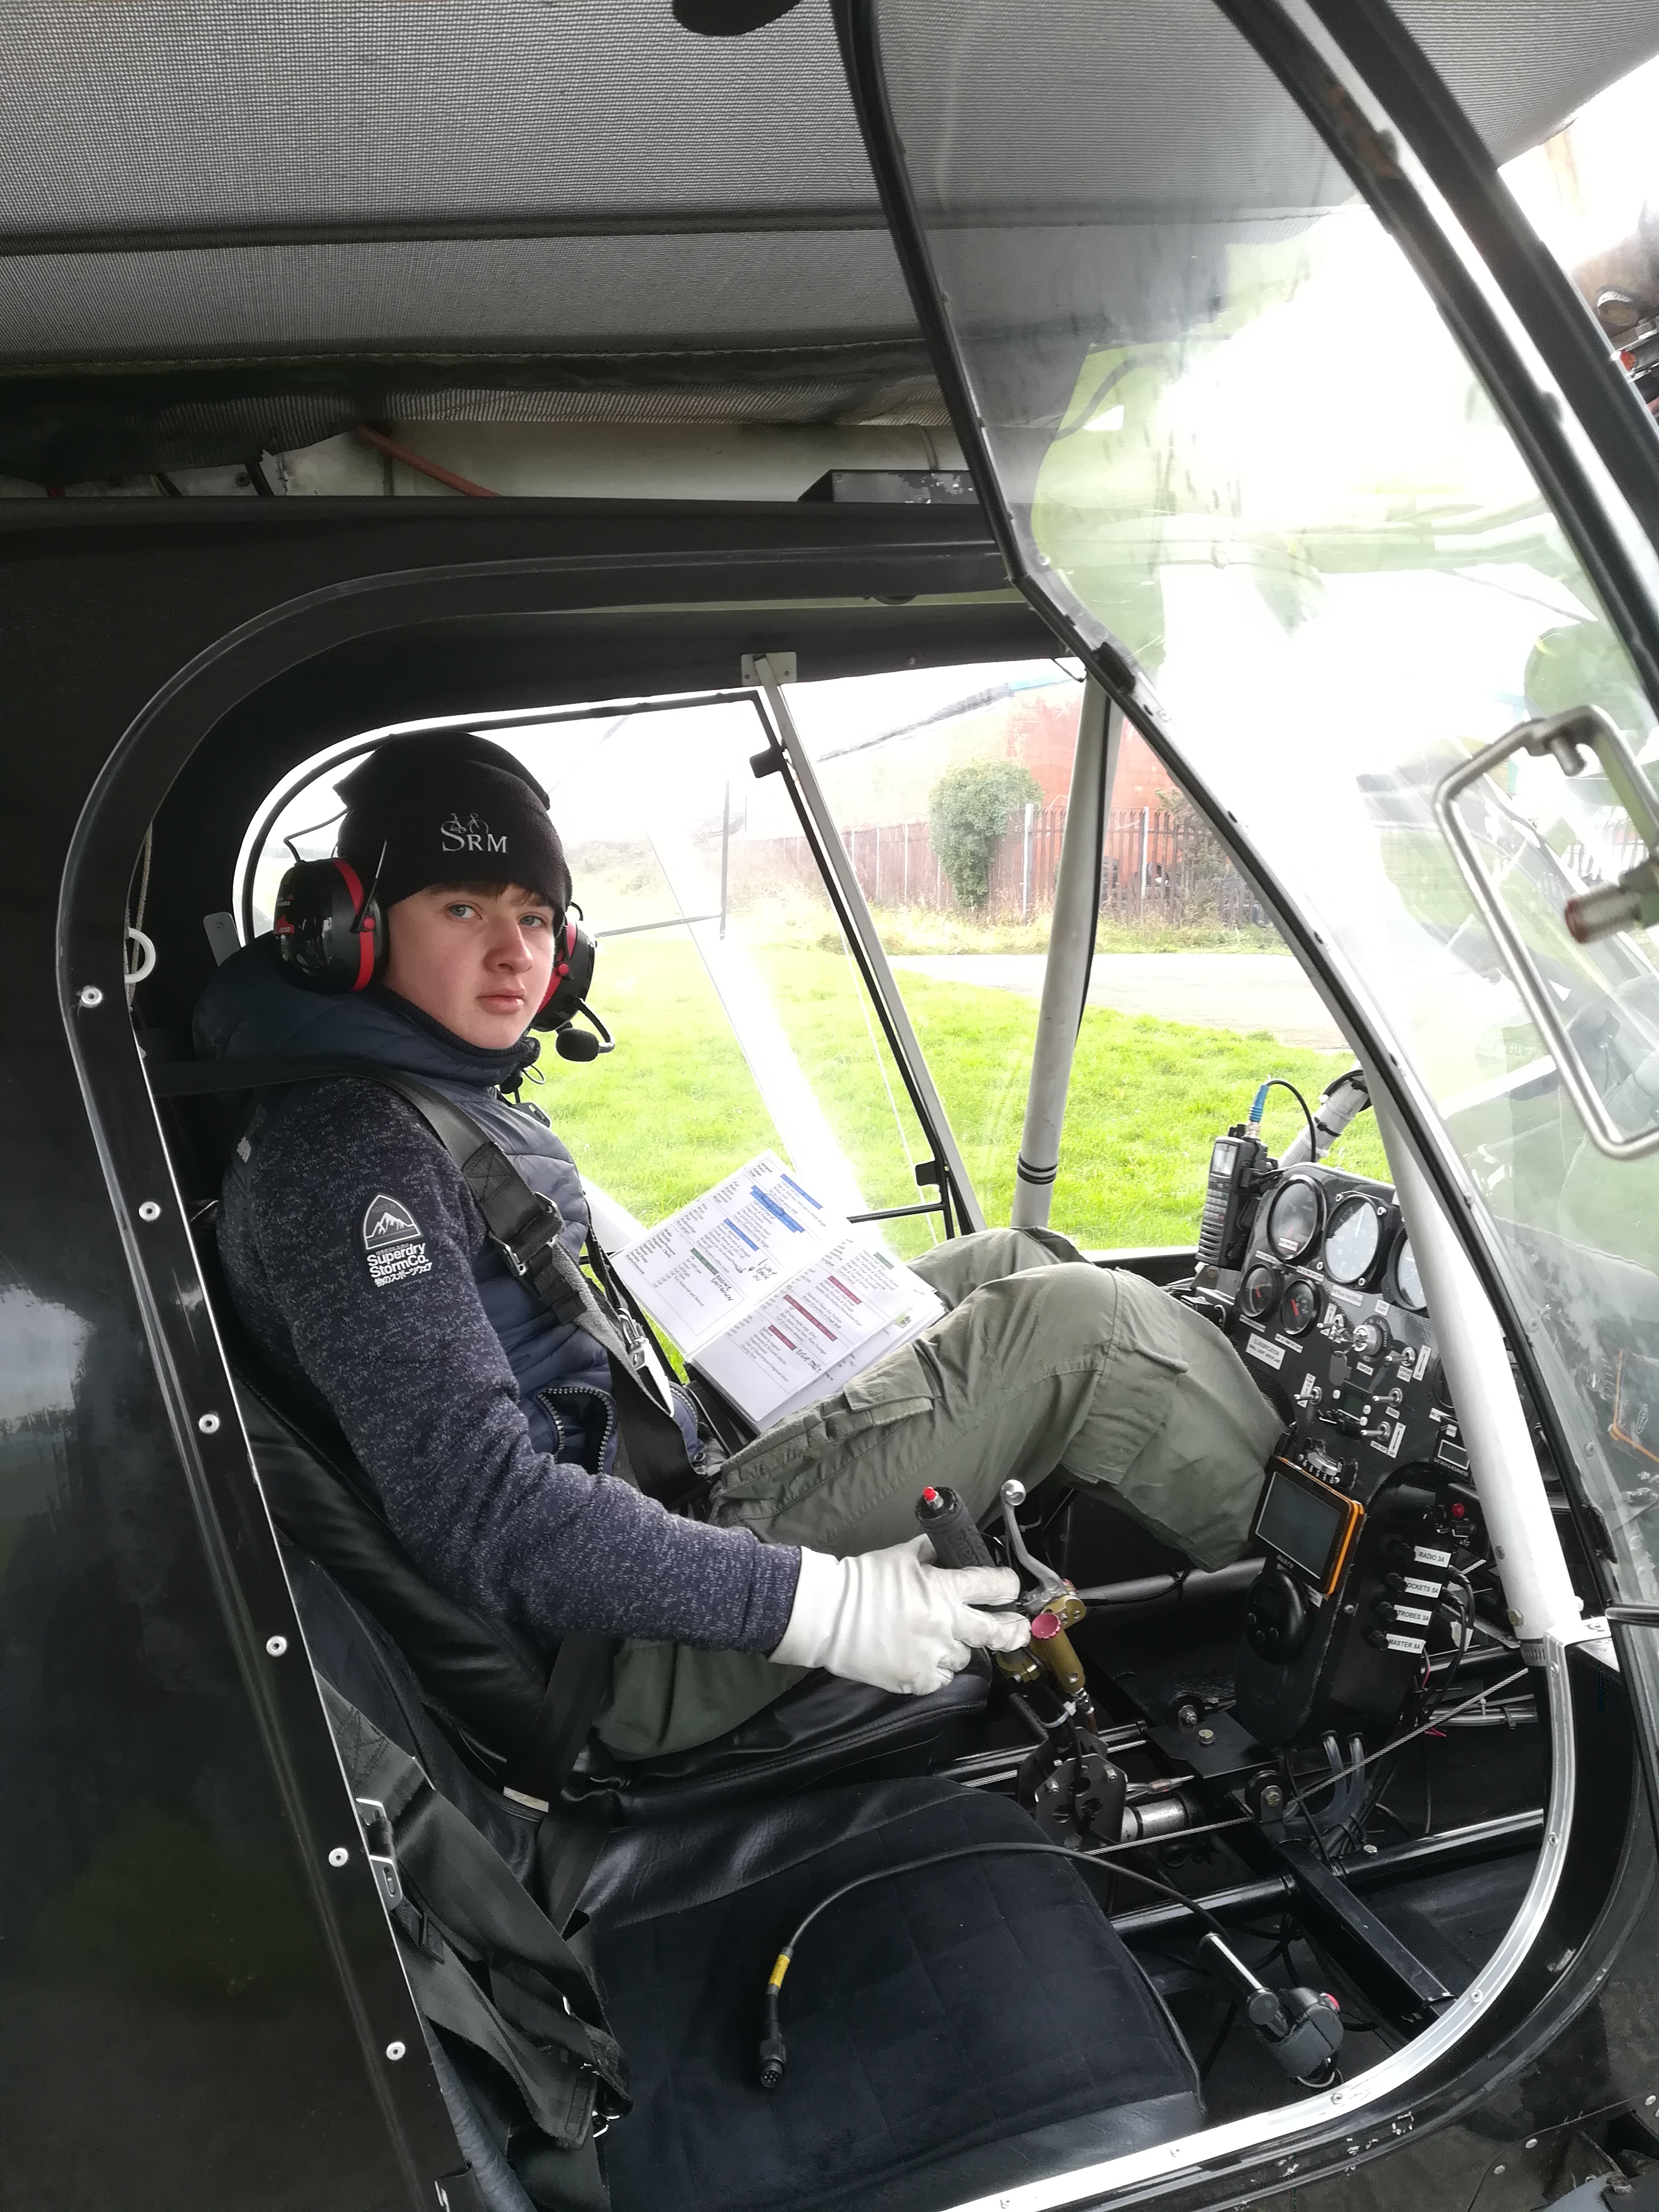 Sean Scullion fly's First Solo on his 16th Birthday